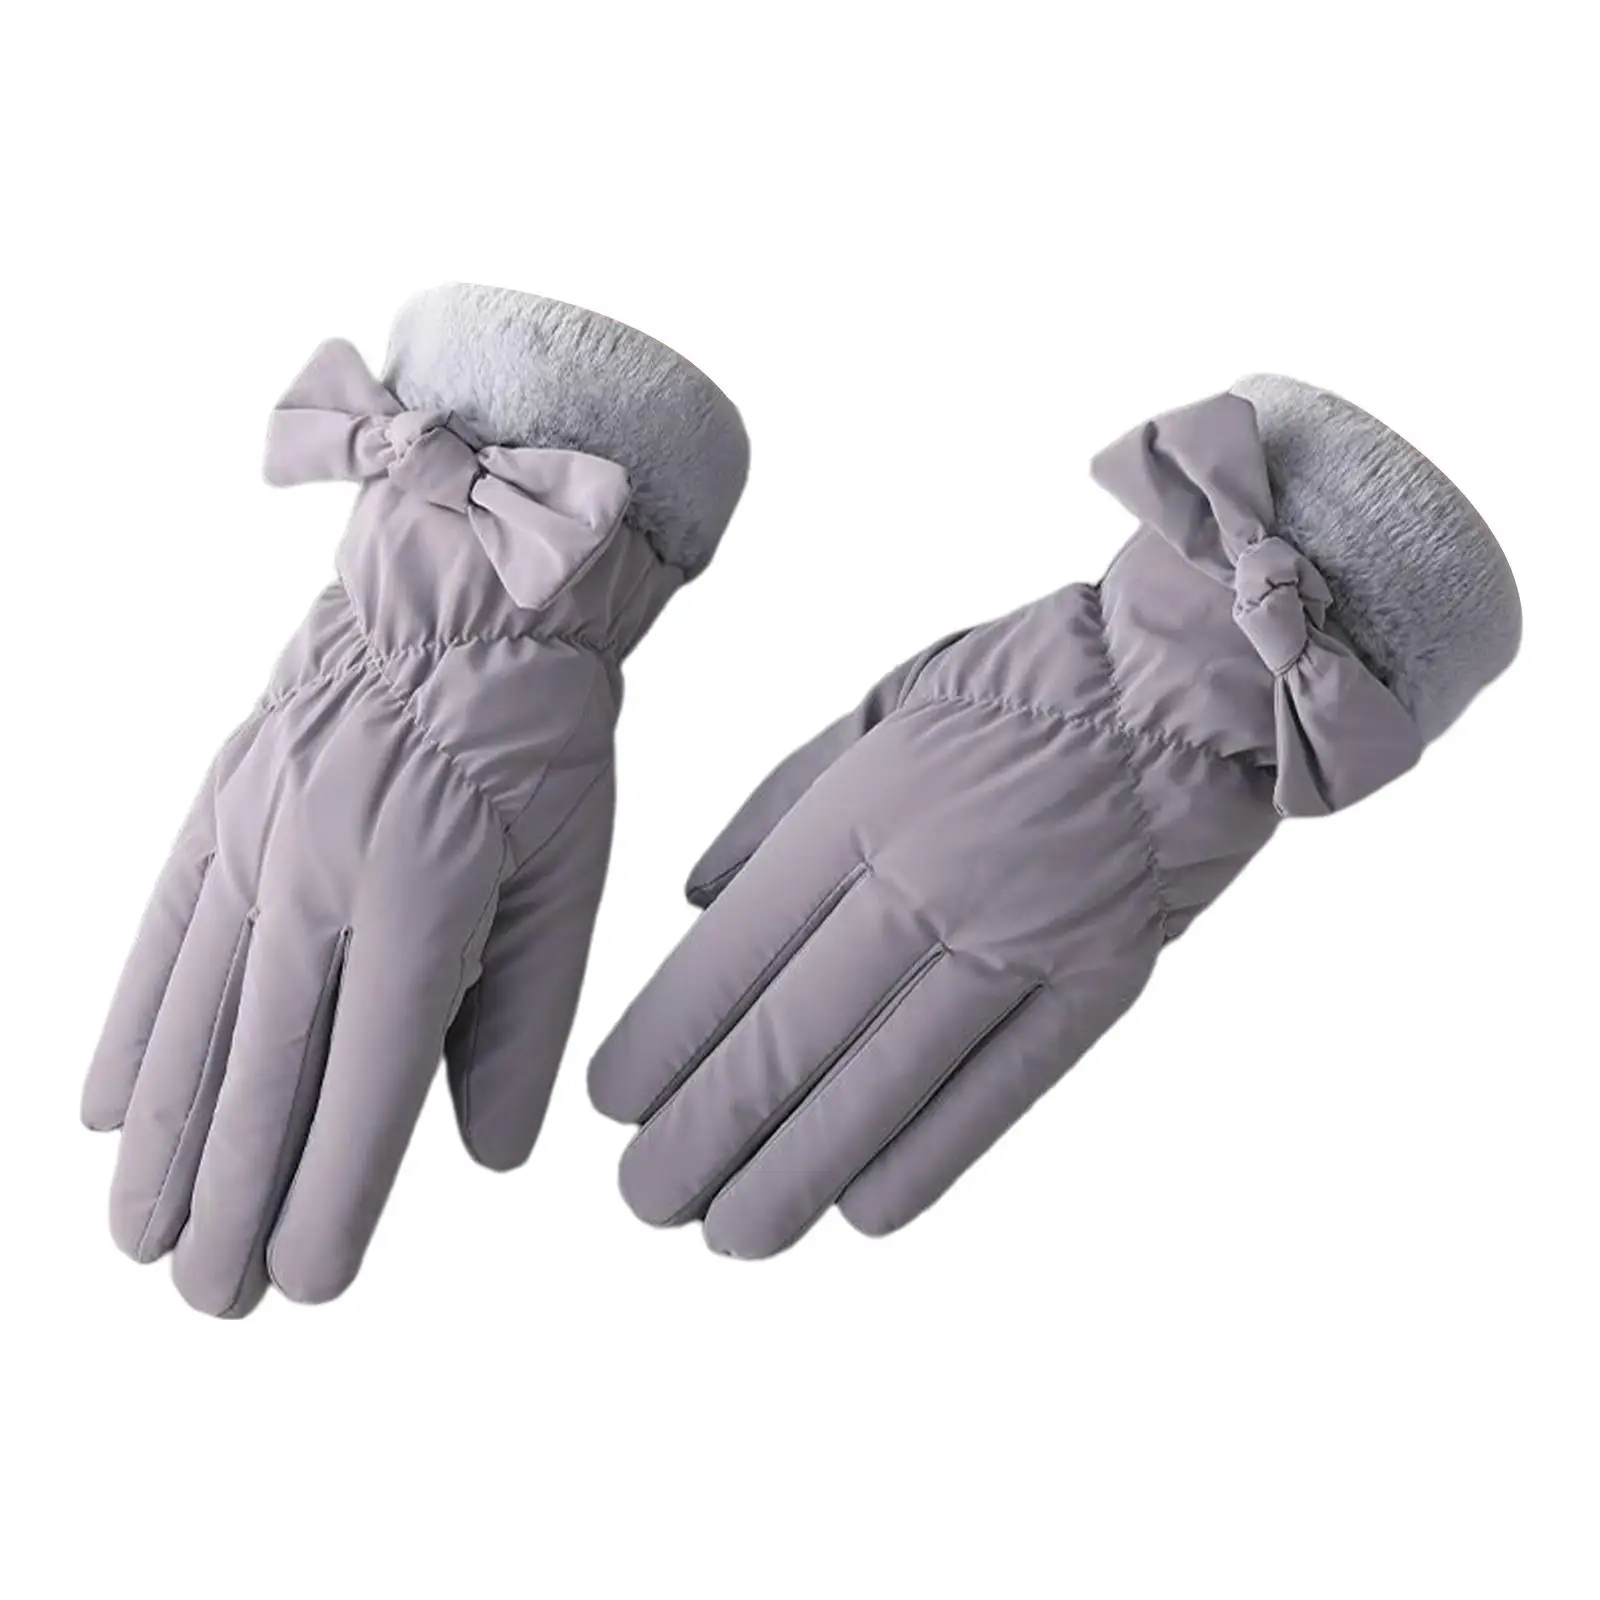 Womens Winter Warm Gloves, Touch Screen Texting Fleece Lined Windproof Driving Gloves Hand Warmer